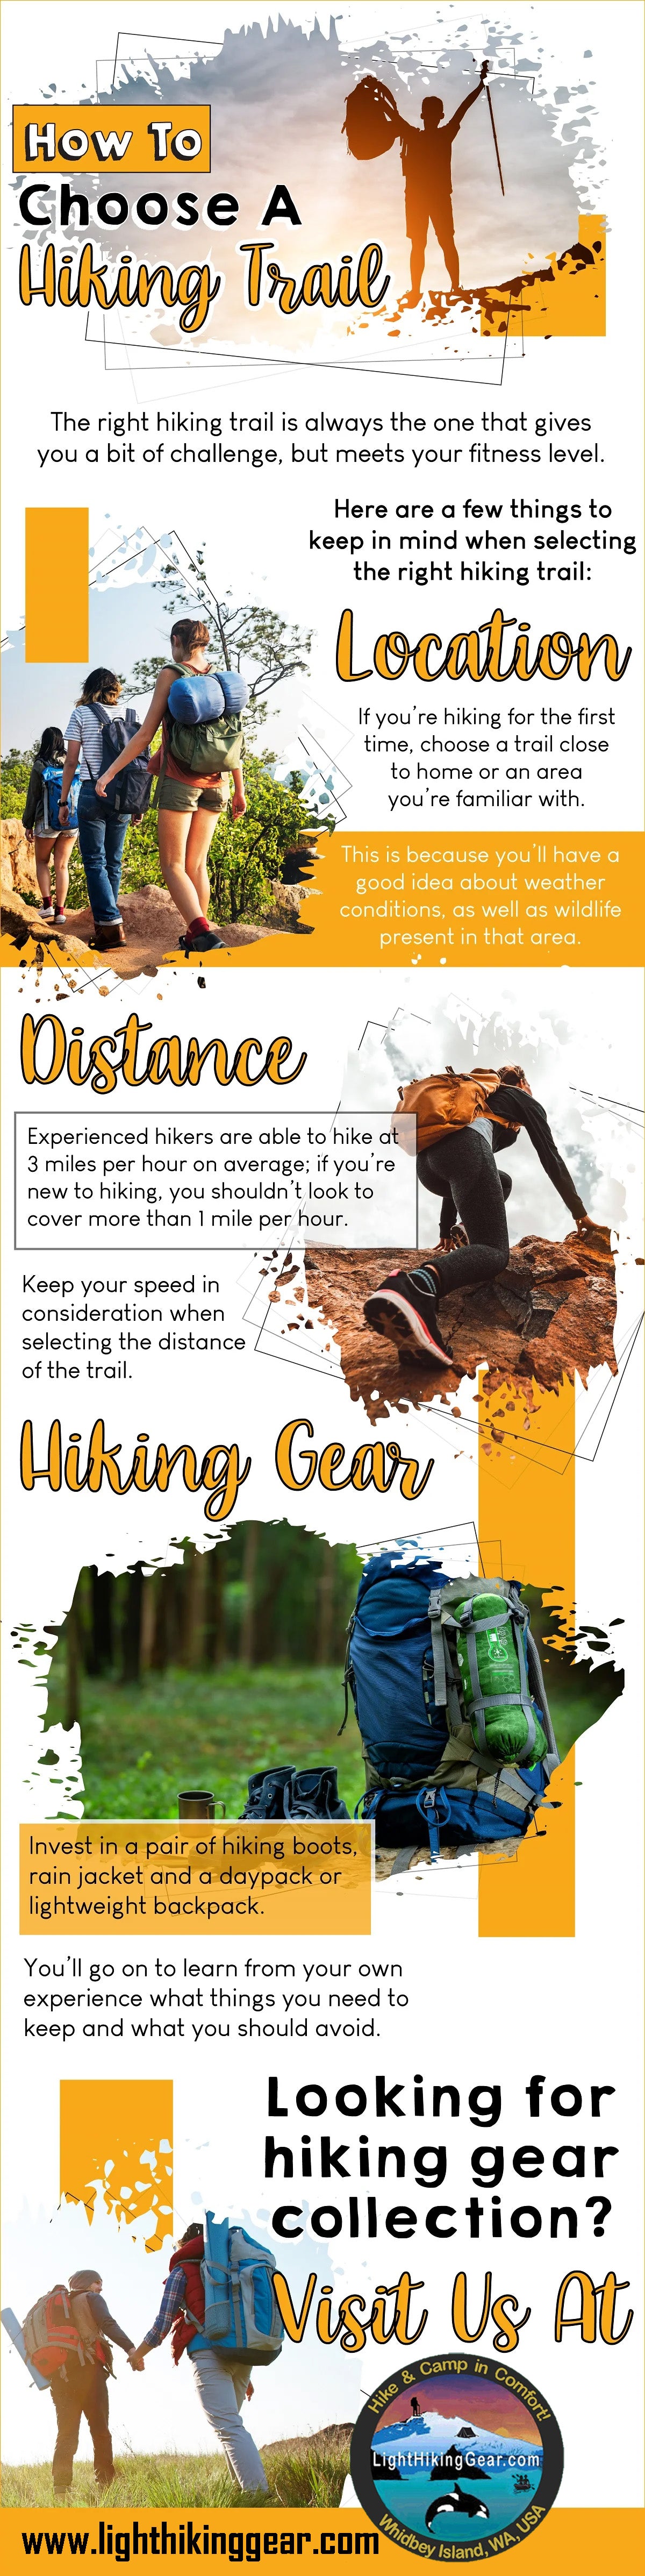 How To Choose A Hiking Trail | Infographic